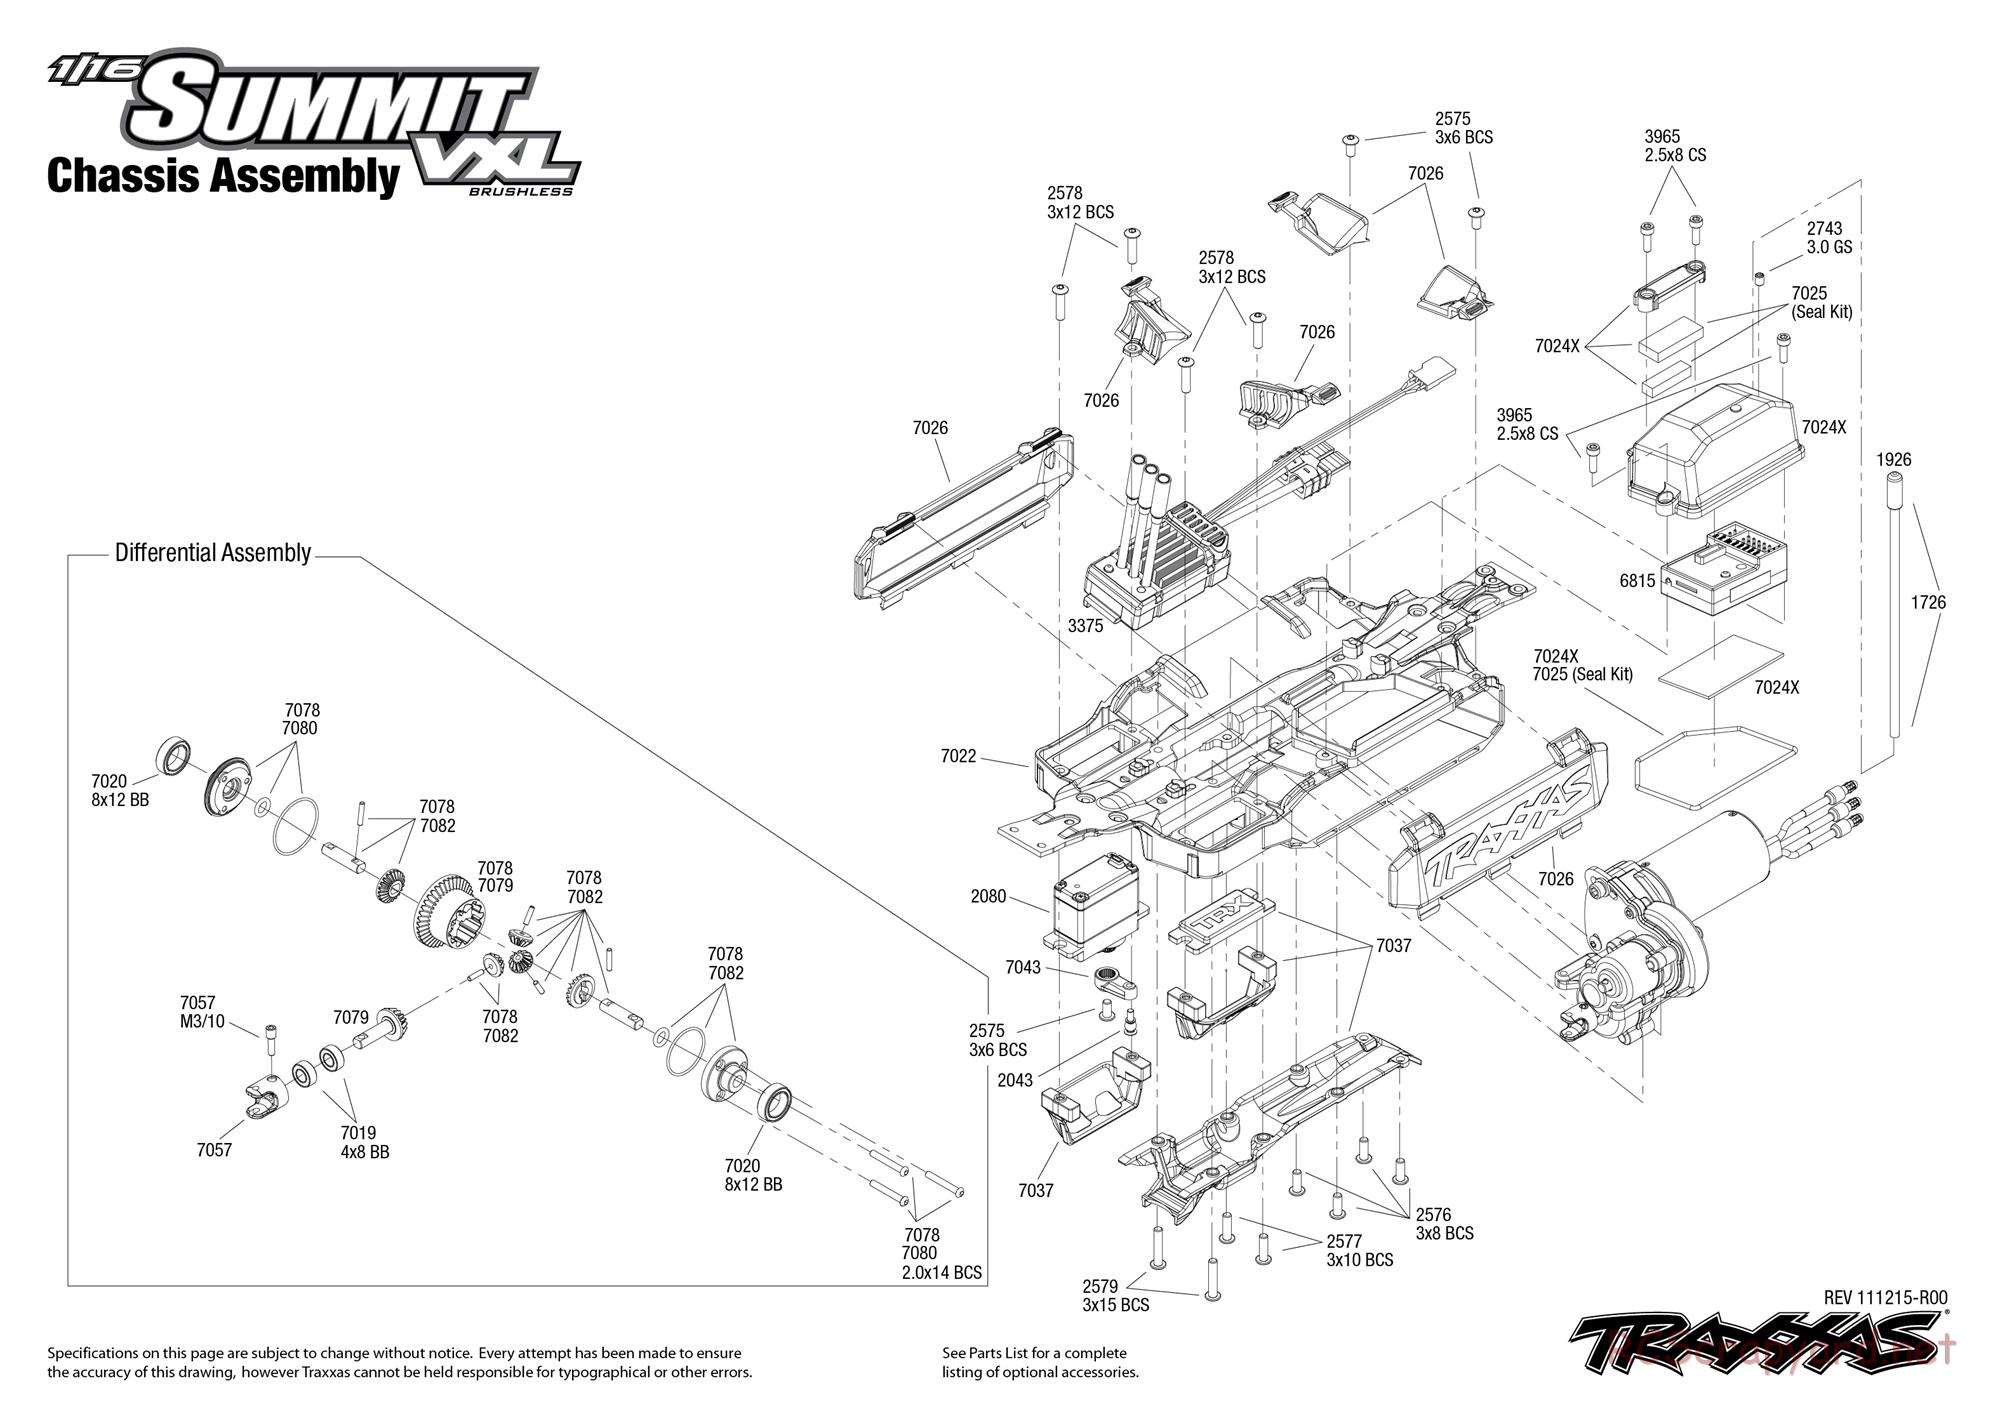 Traxxas - 1/16 Summit VXL (2010) - Exploded Views - Page 1